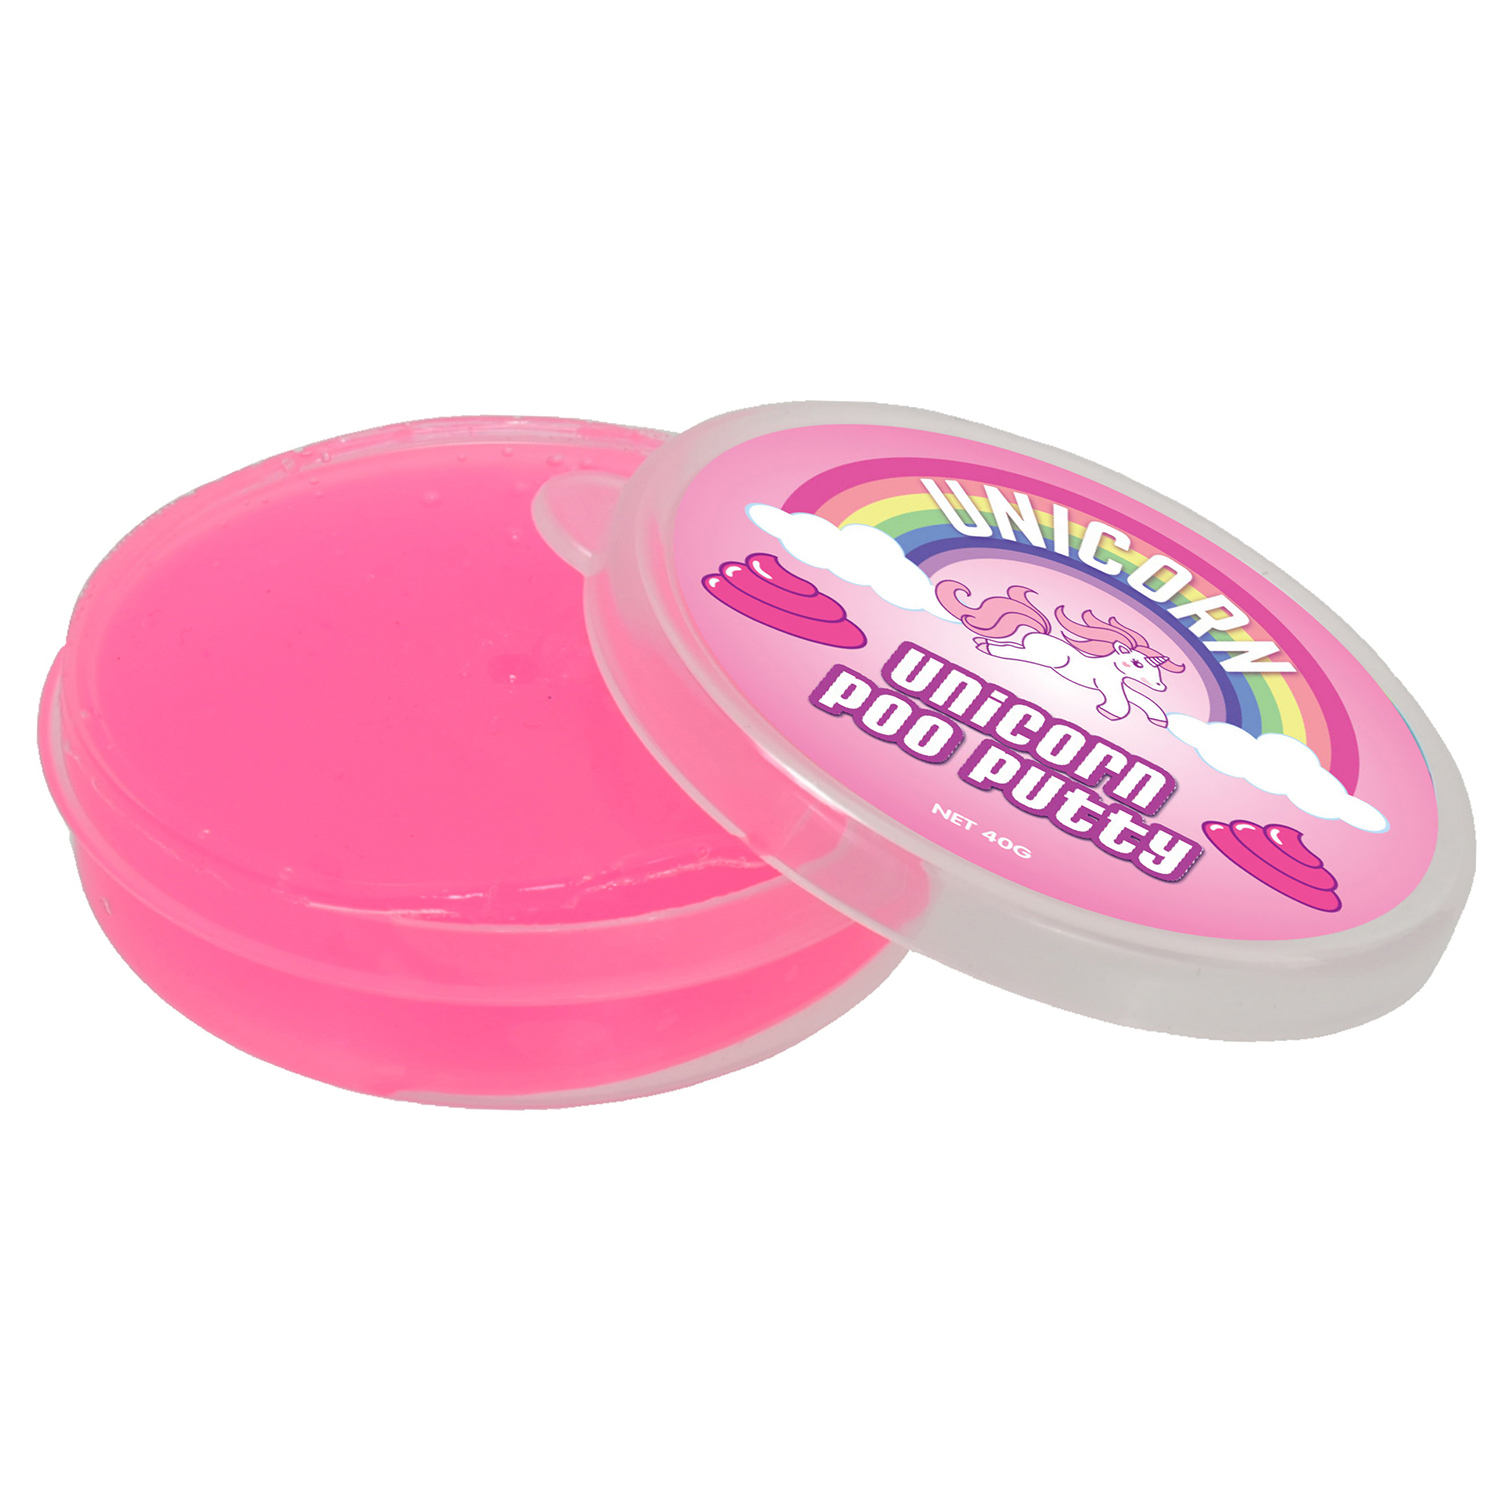 Single Everyday Unicorn Poo Putty in Assorted styles Image 1